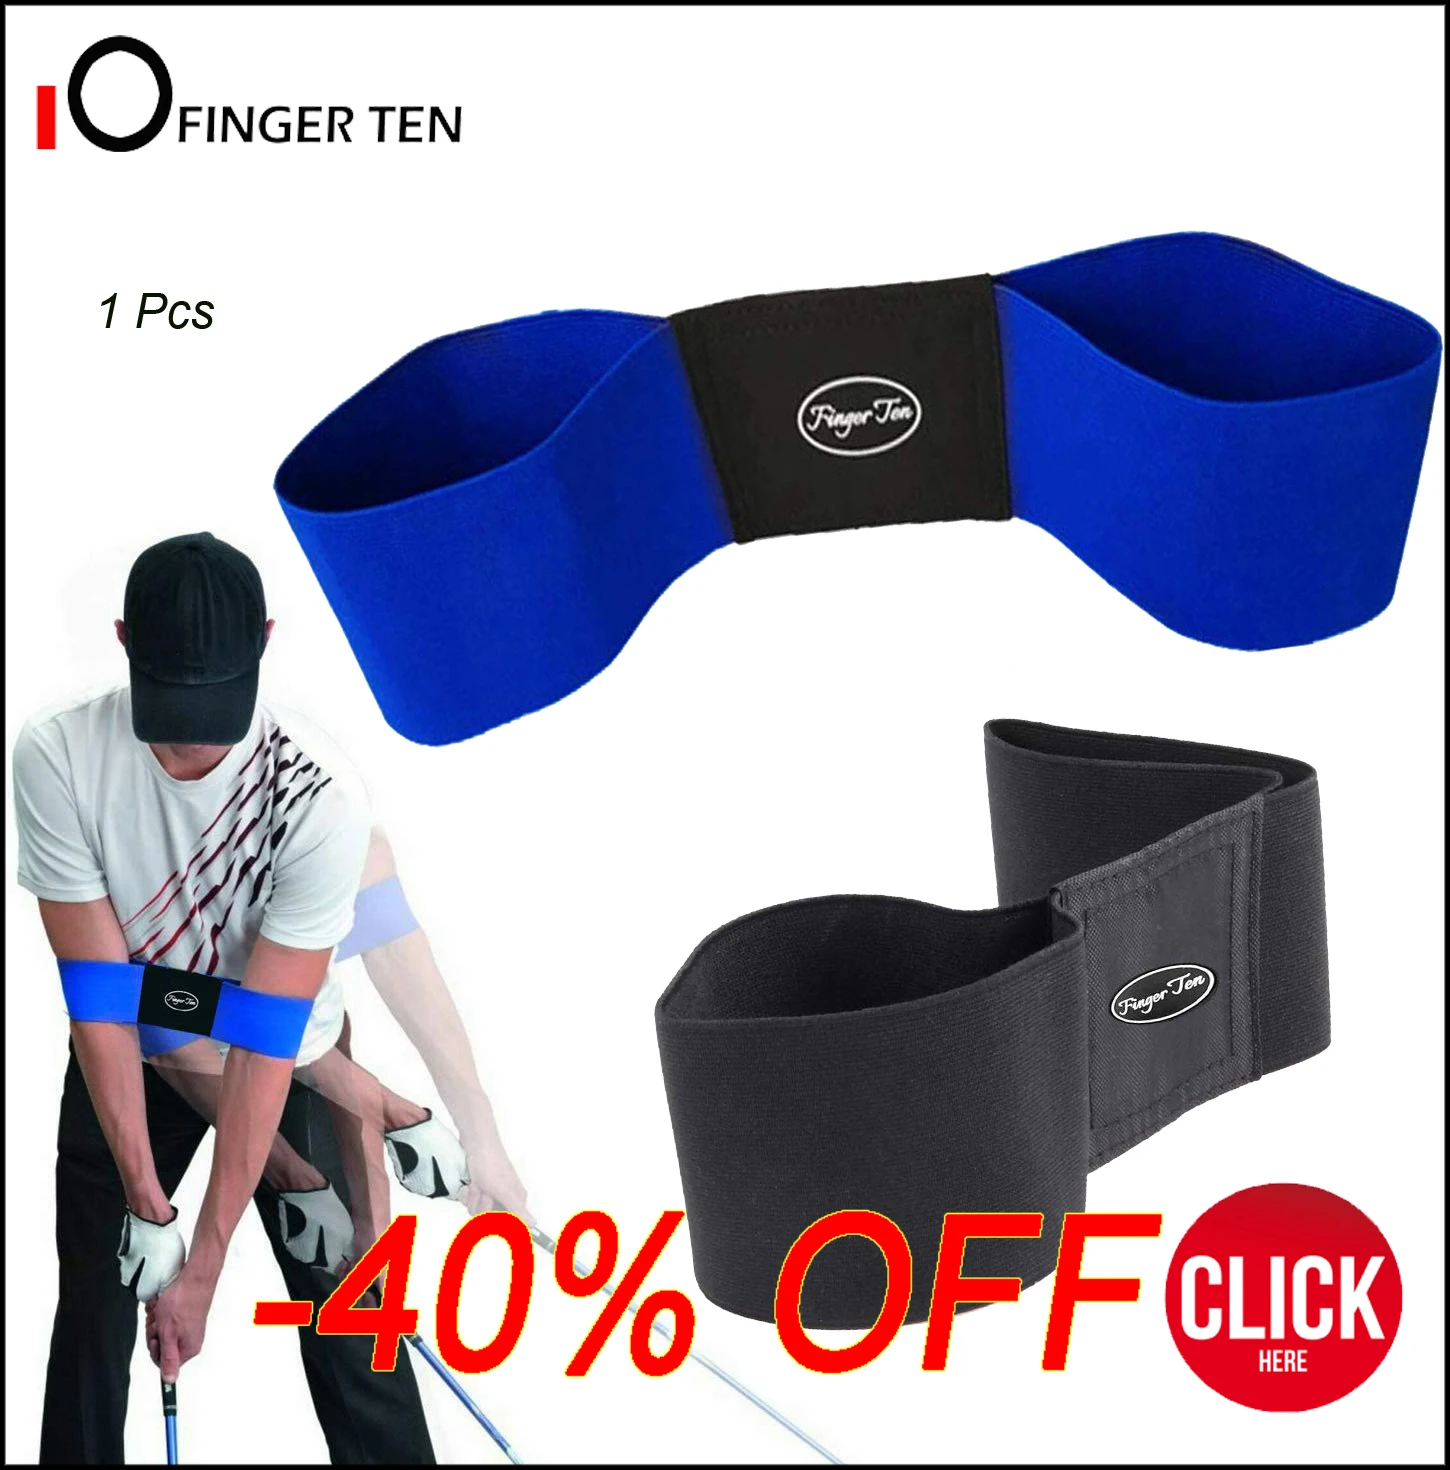 2 Pcs Silicone Magnetic Golf Hat Clip Ball Marker Holder Attach to Your Cap Pocket Edge Belt Clothes Gift